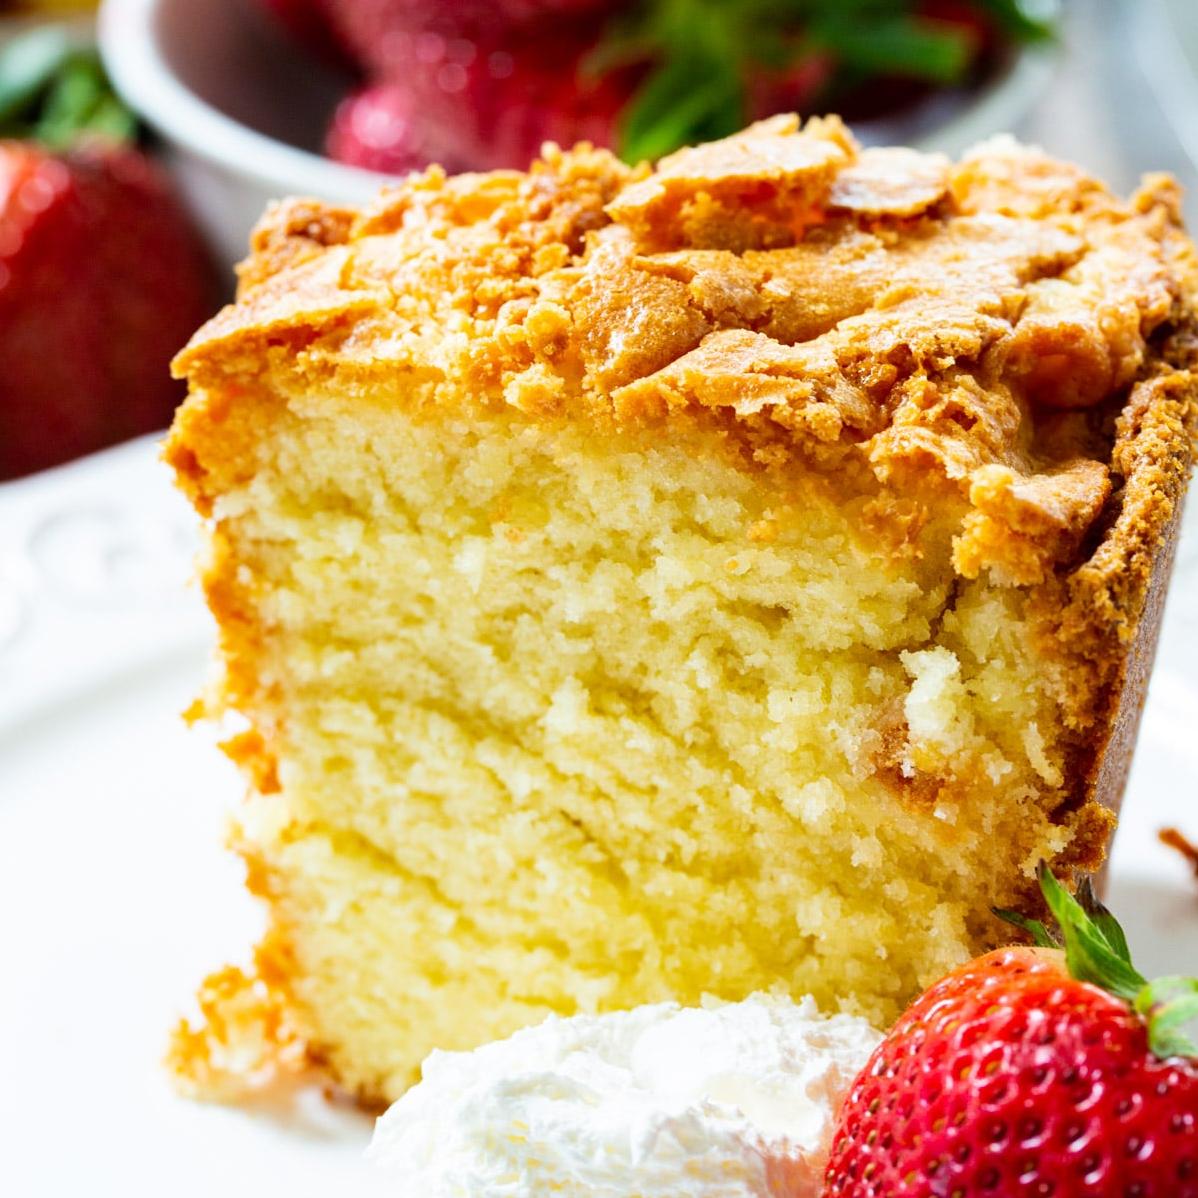  The golden crust on this pound cake will make your heart sing!